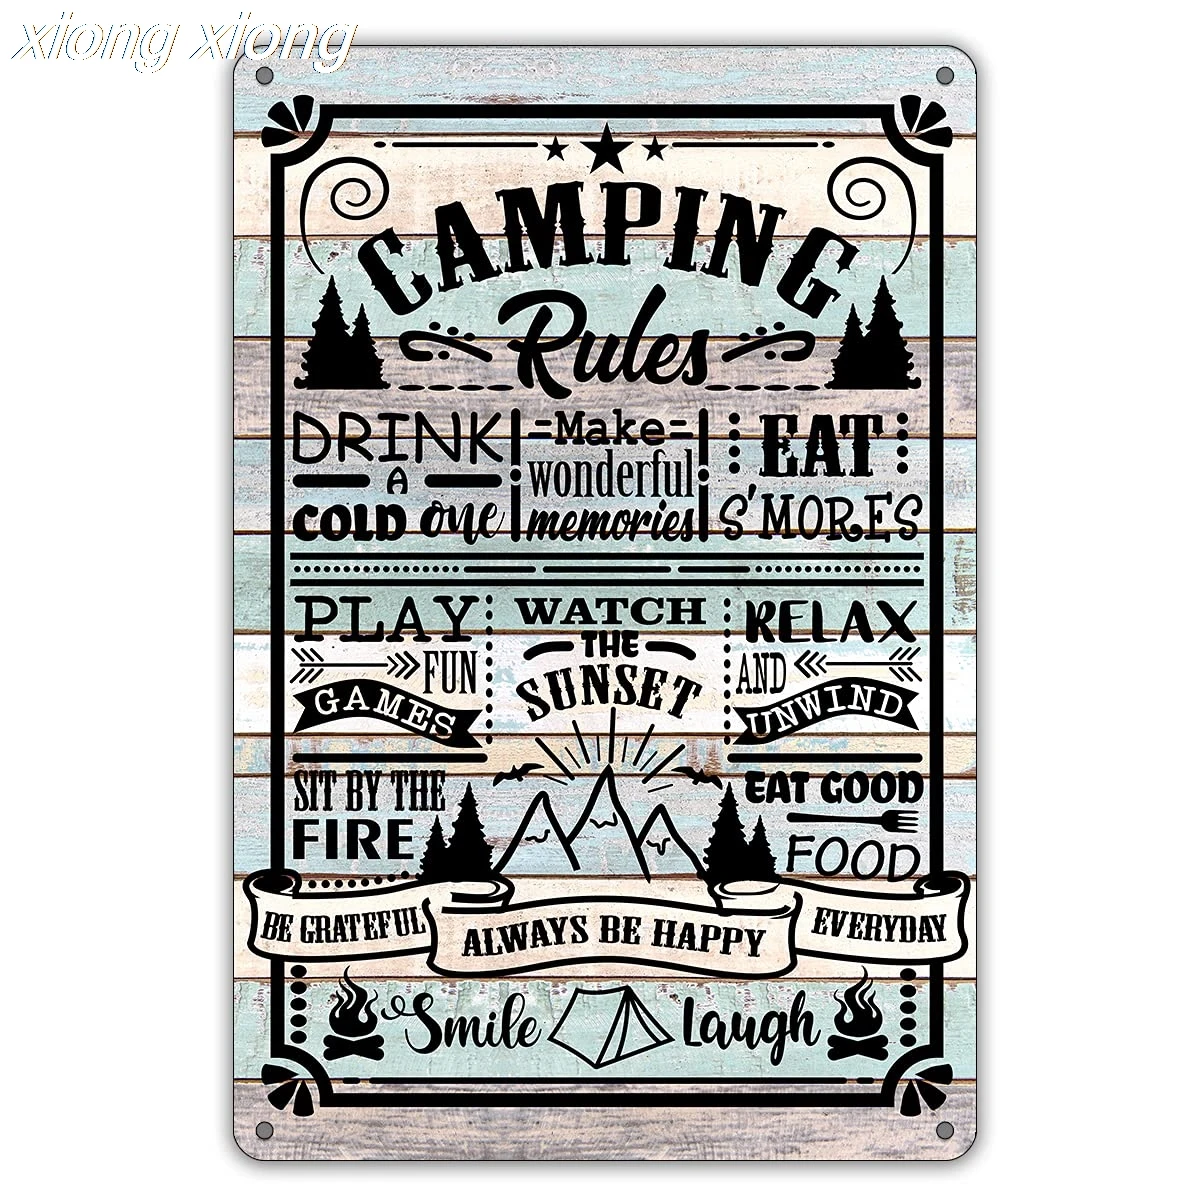 

Camping Rules Metal Tin Sign Wall Decor Farmhouse Rustic Camping Signs with Sayings for Home Camper Room Decor Gifts